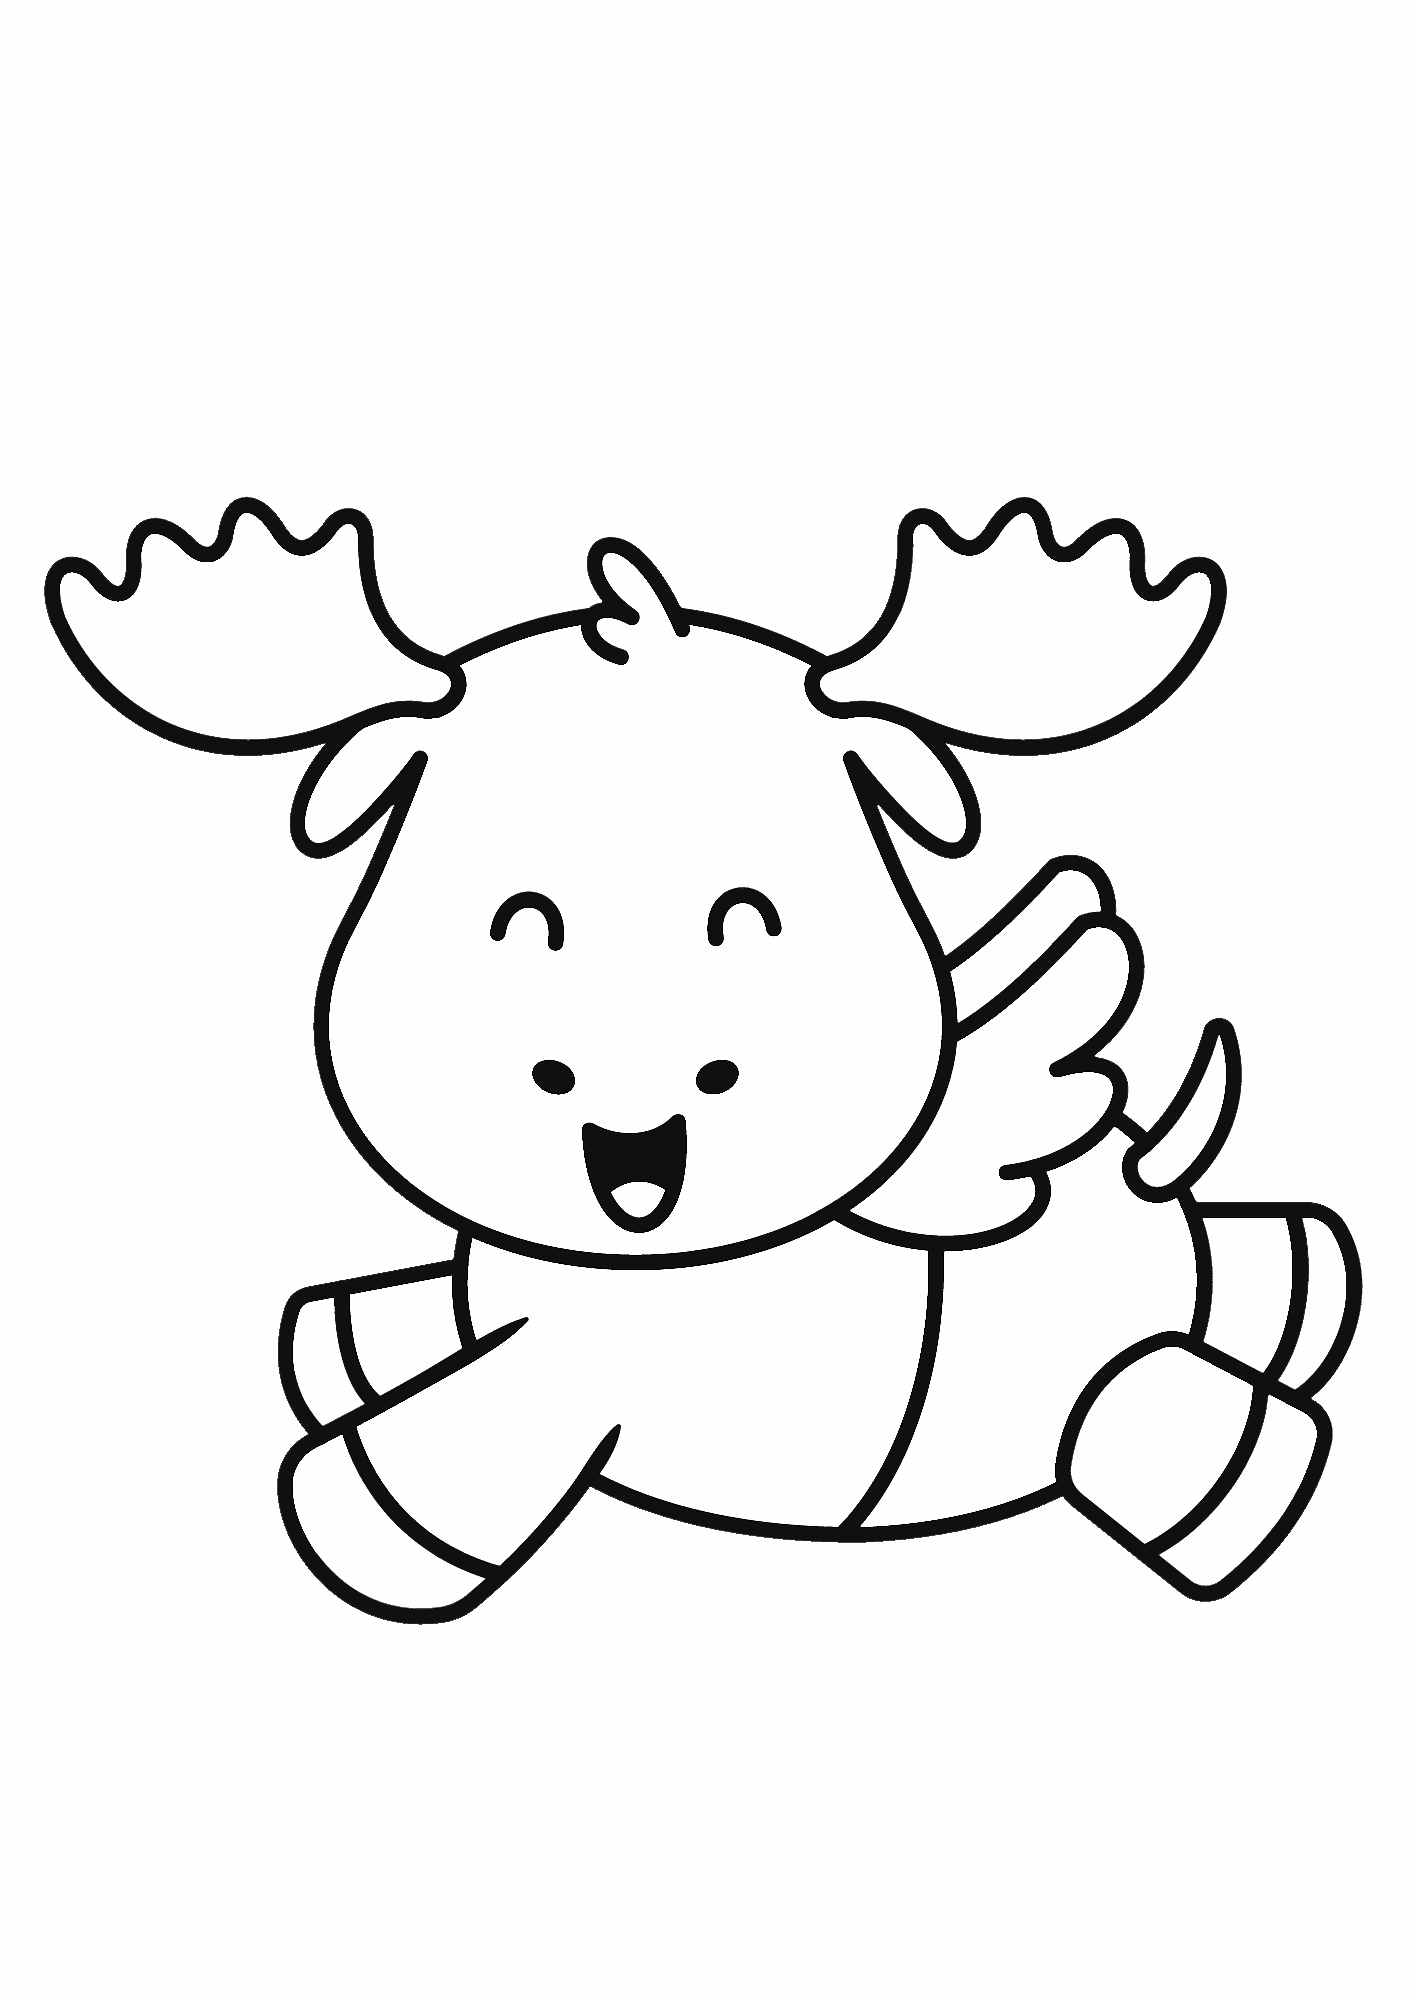 Free Moose Coloring Pages For Children